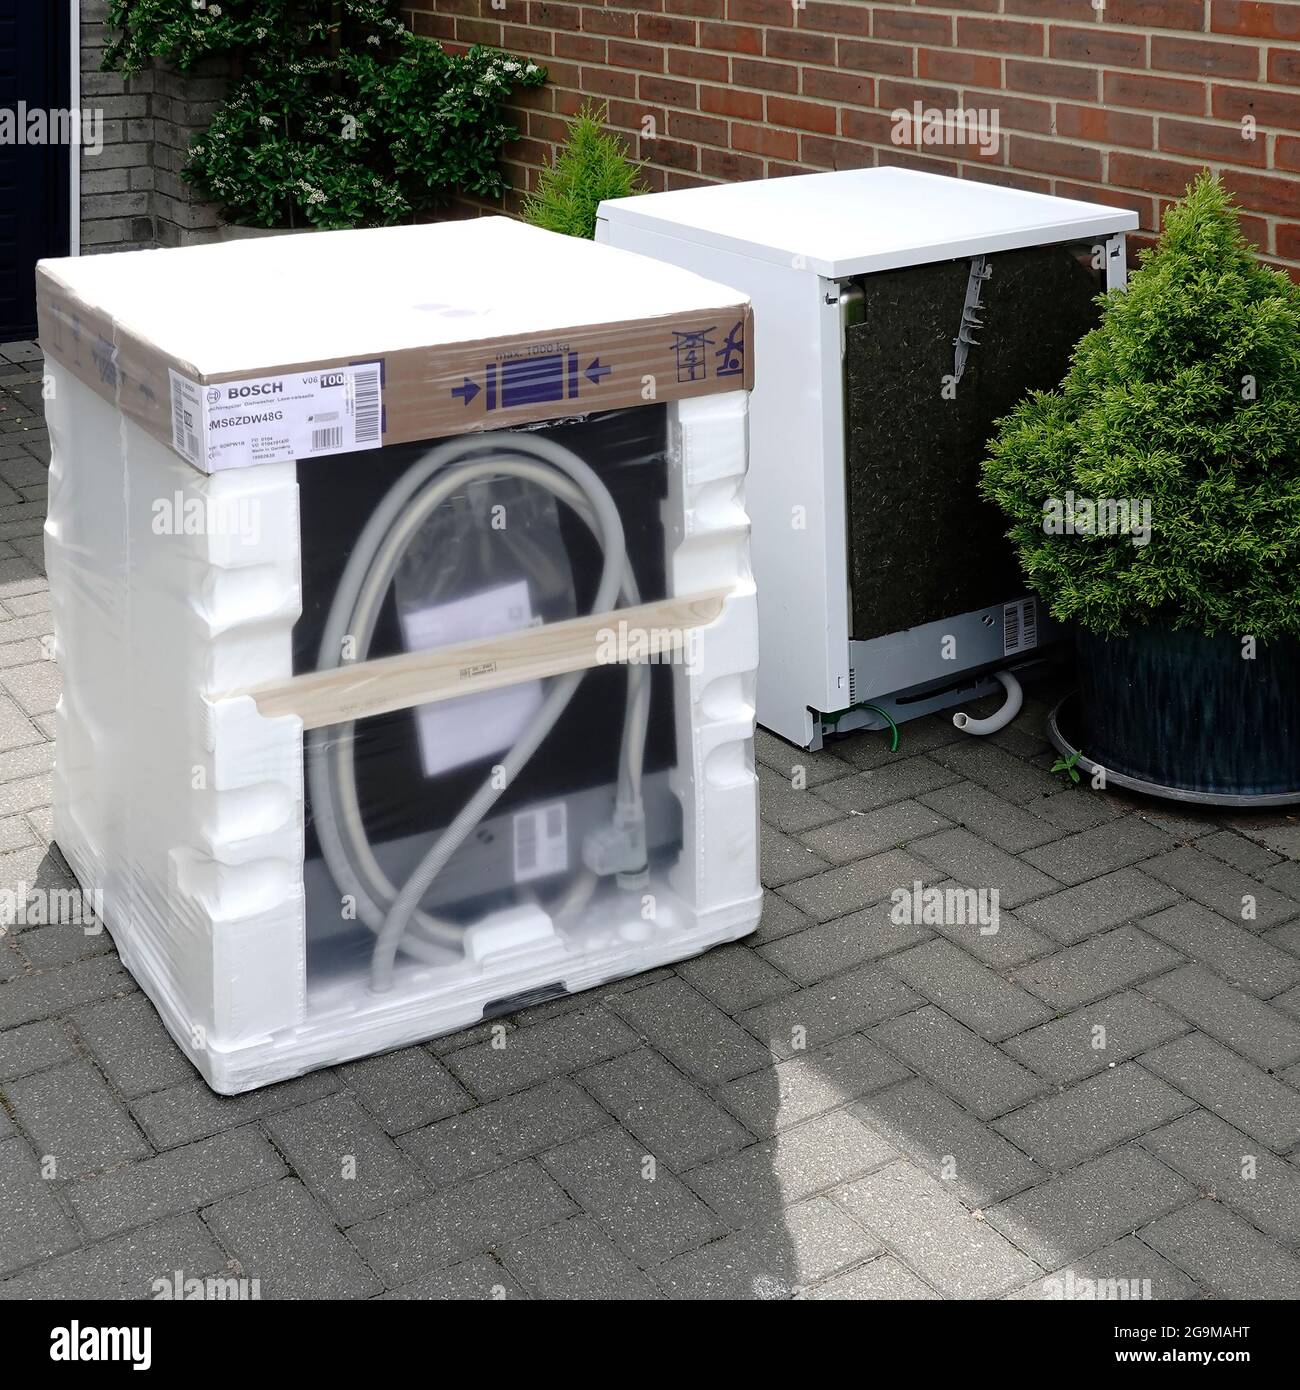 New Bosch white goods domestic dishwasher appliance polystyrene packaging delivered to customers house beside old defective machine for recycling UK Stock Photo